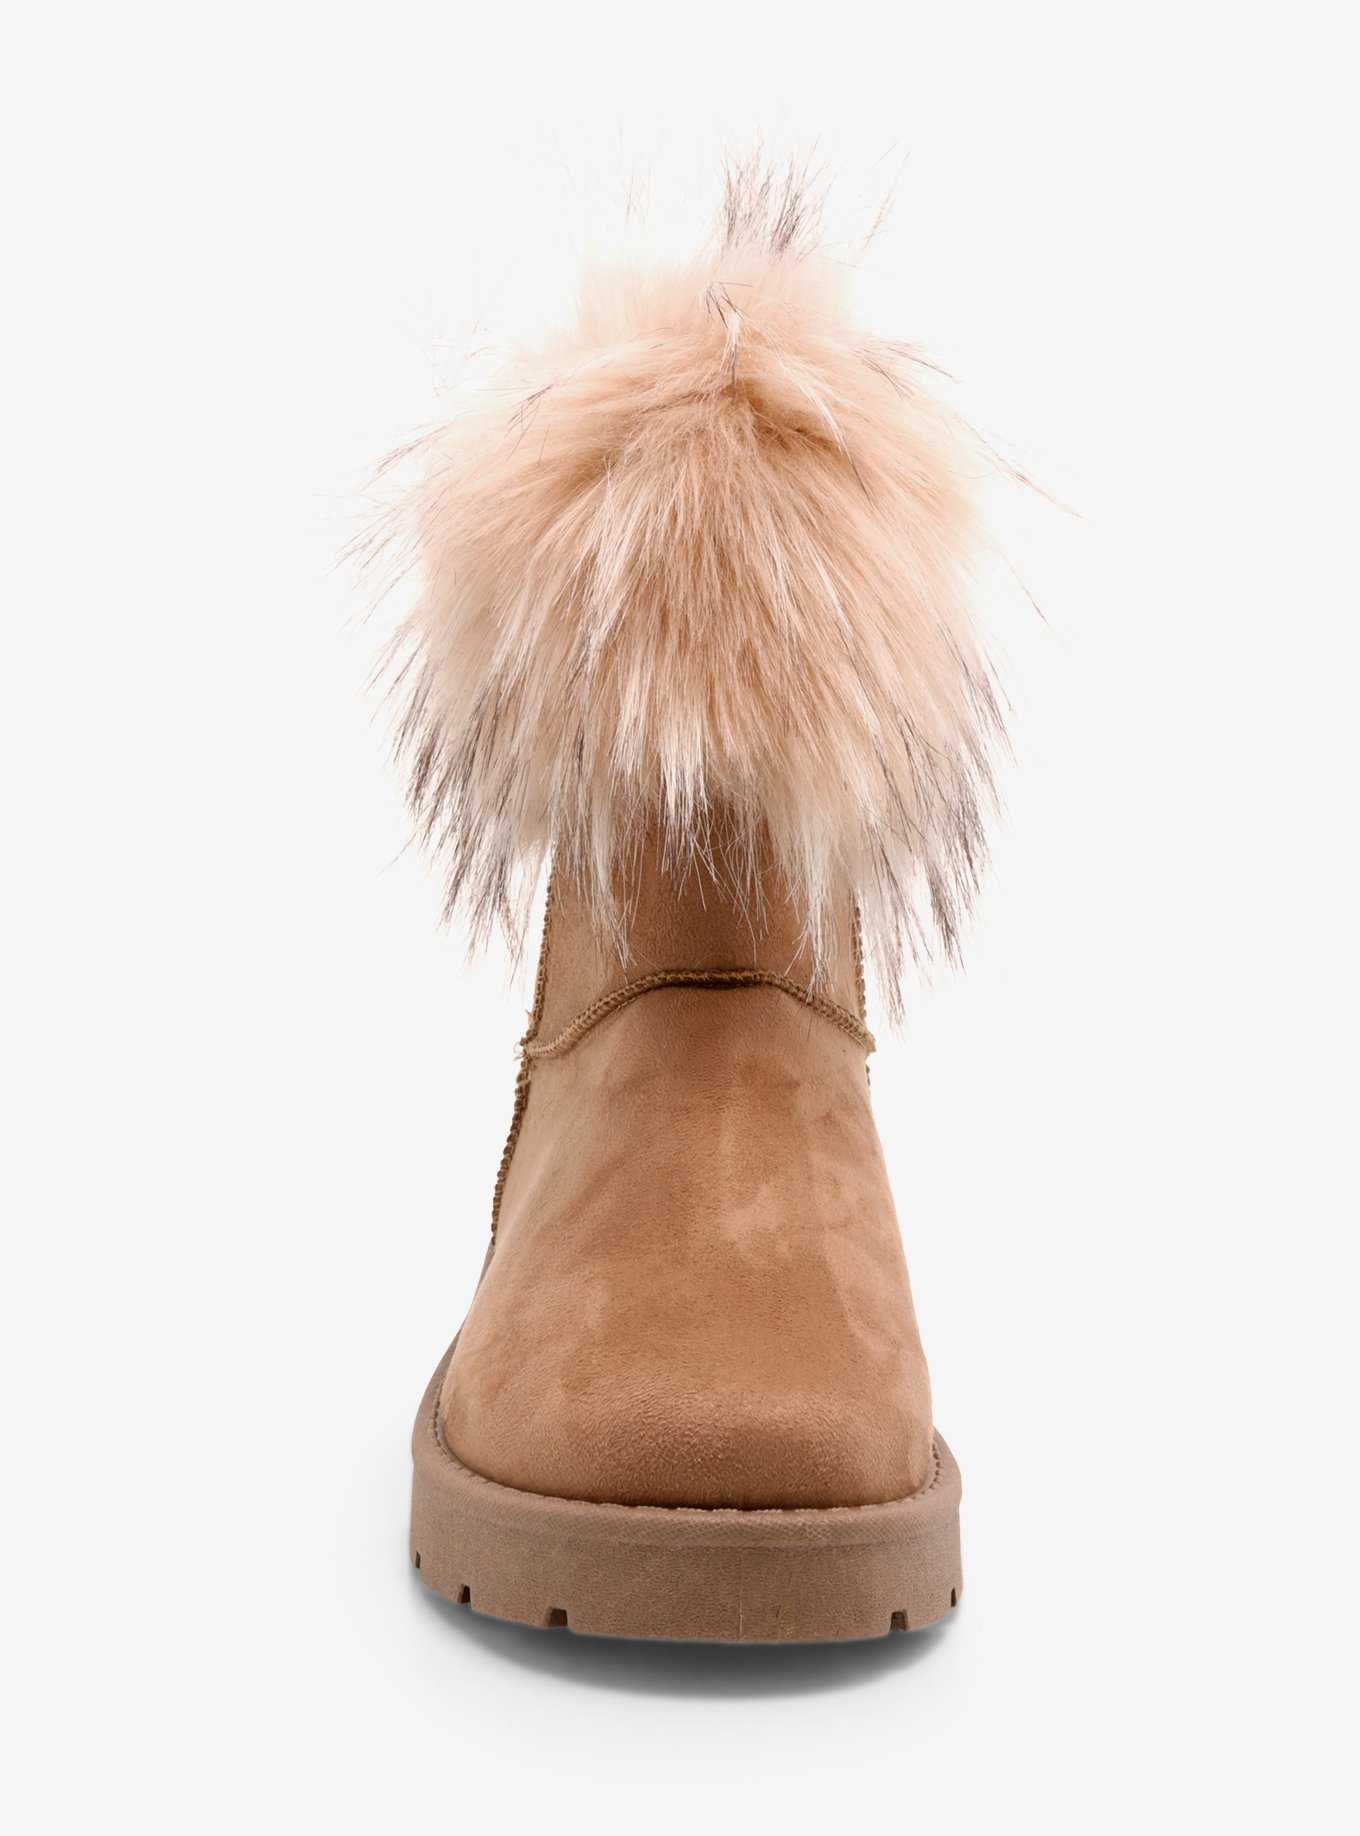 Dirty Laundry Brown Faux Fur Lined Boots, , hi-res